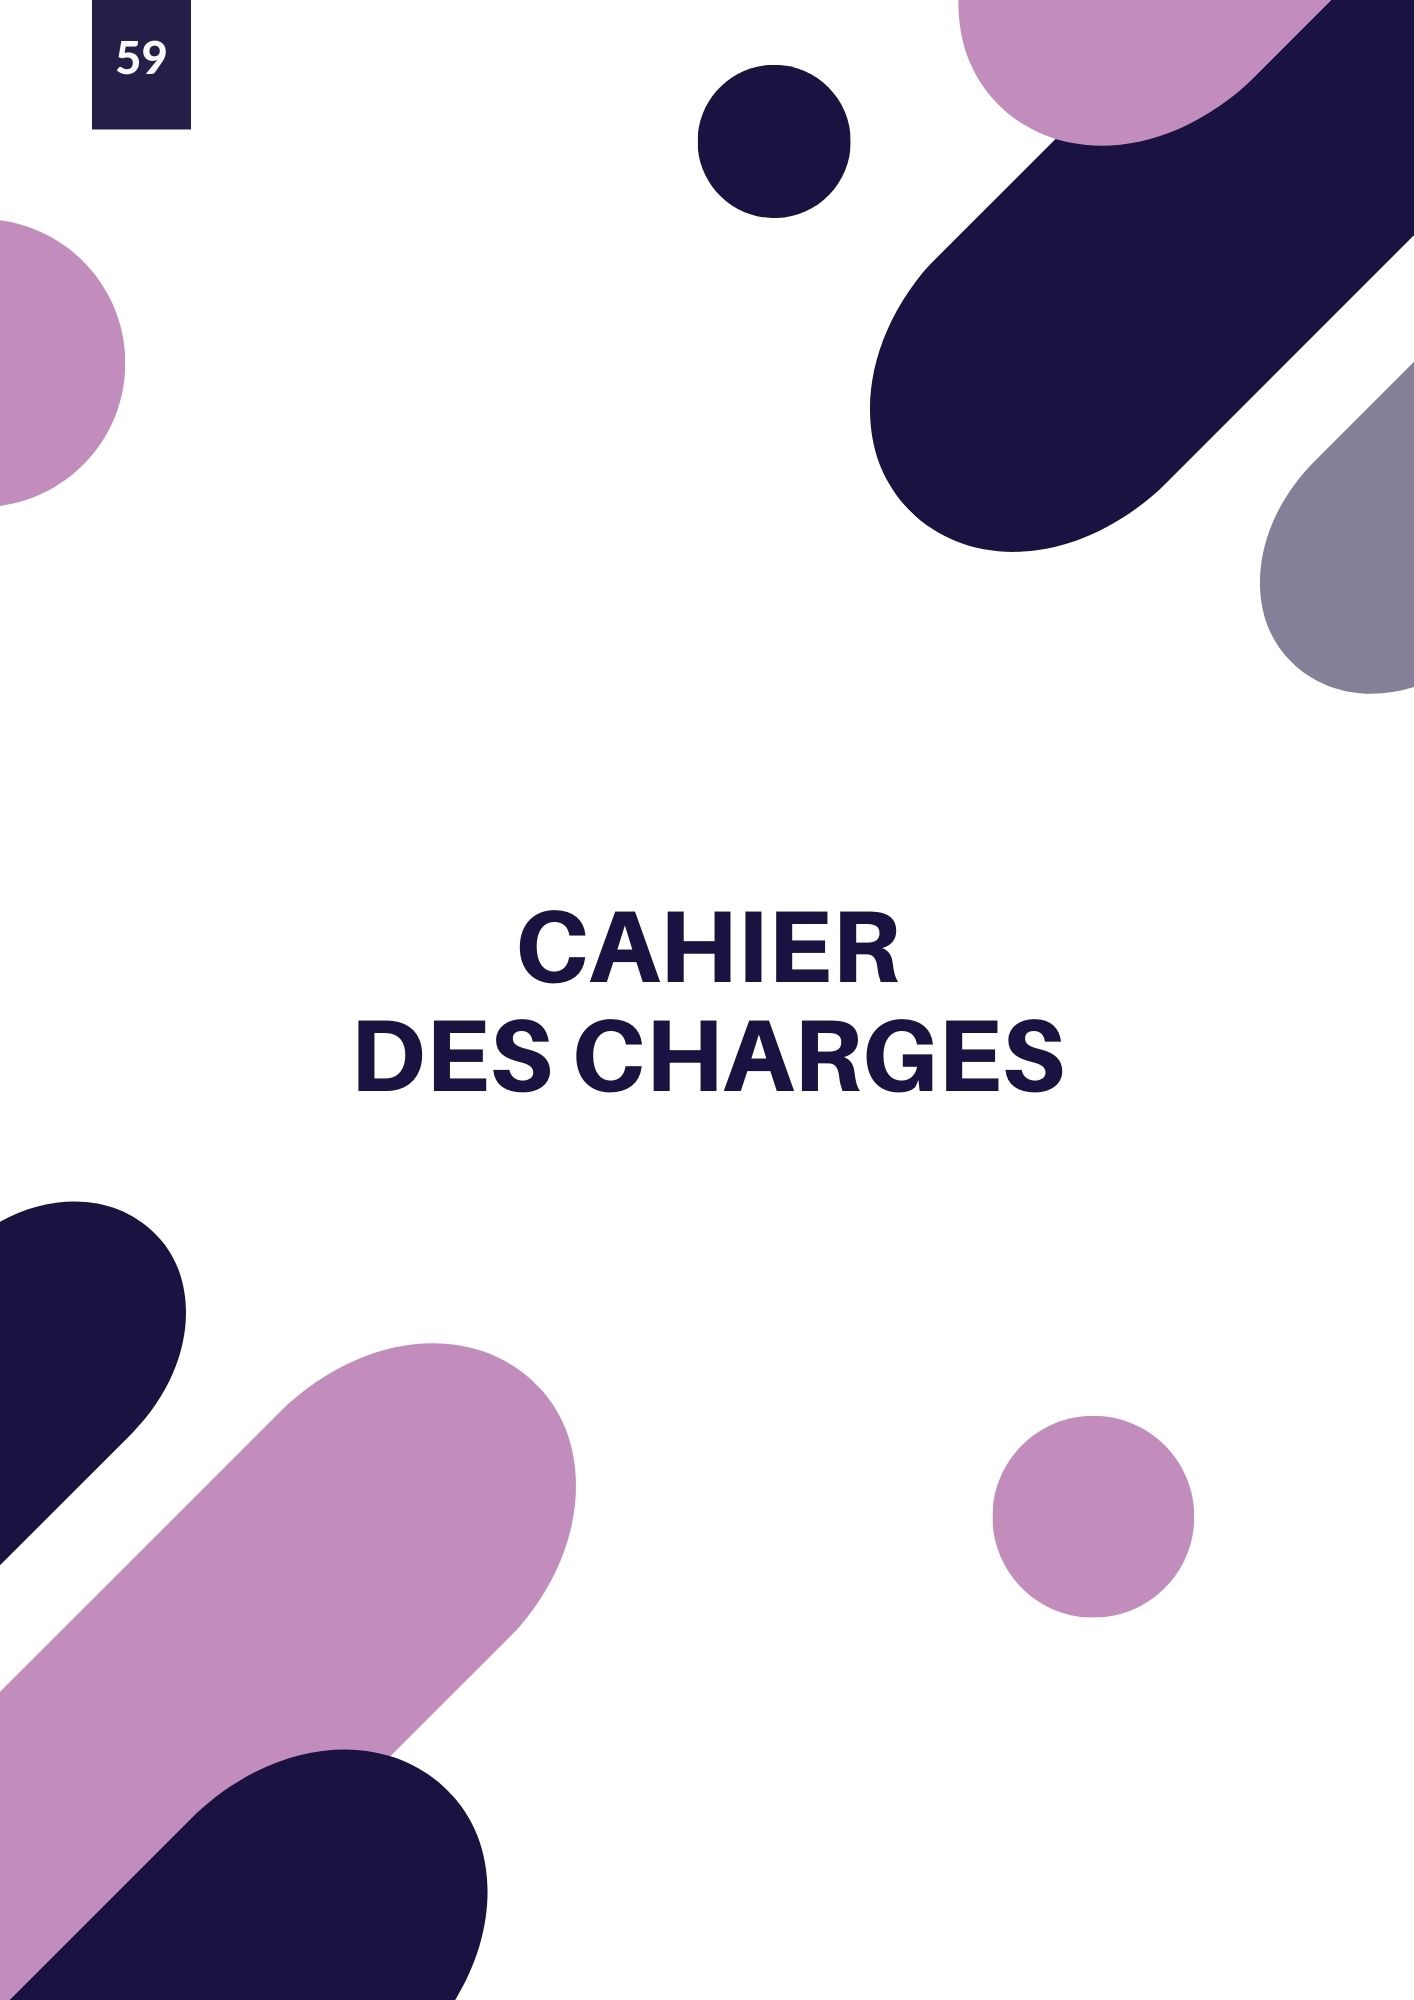 61 cahier des charges